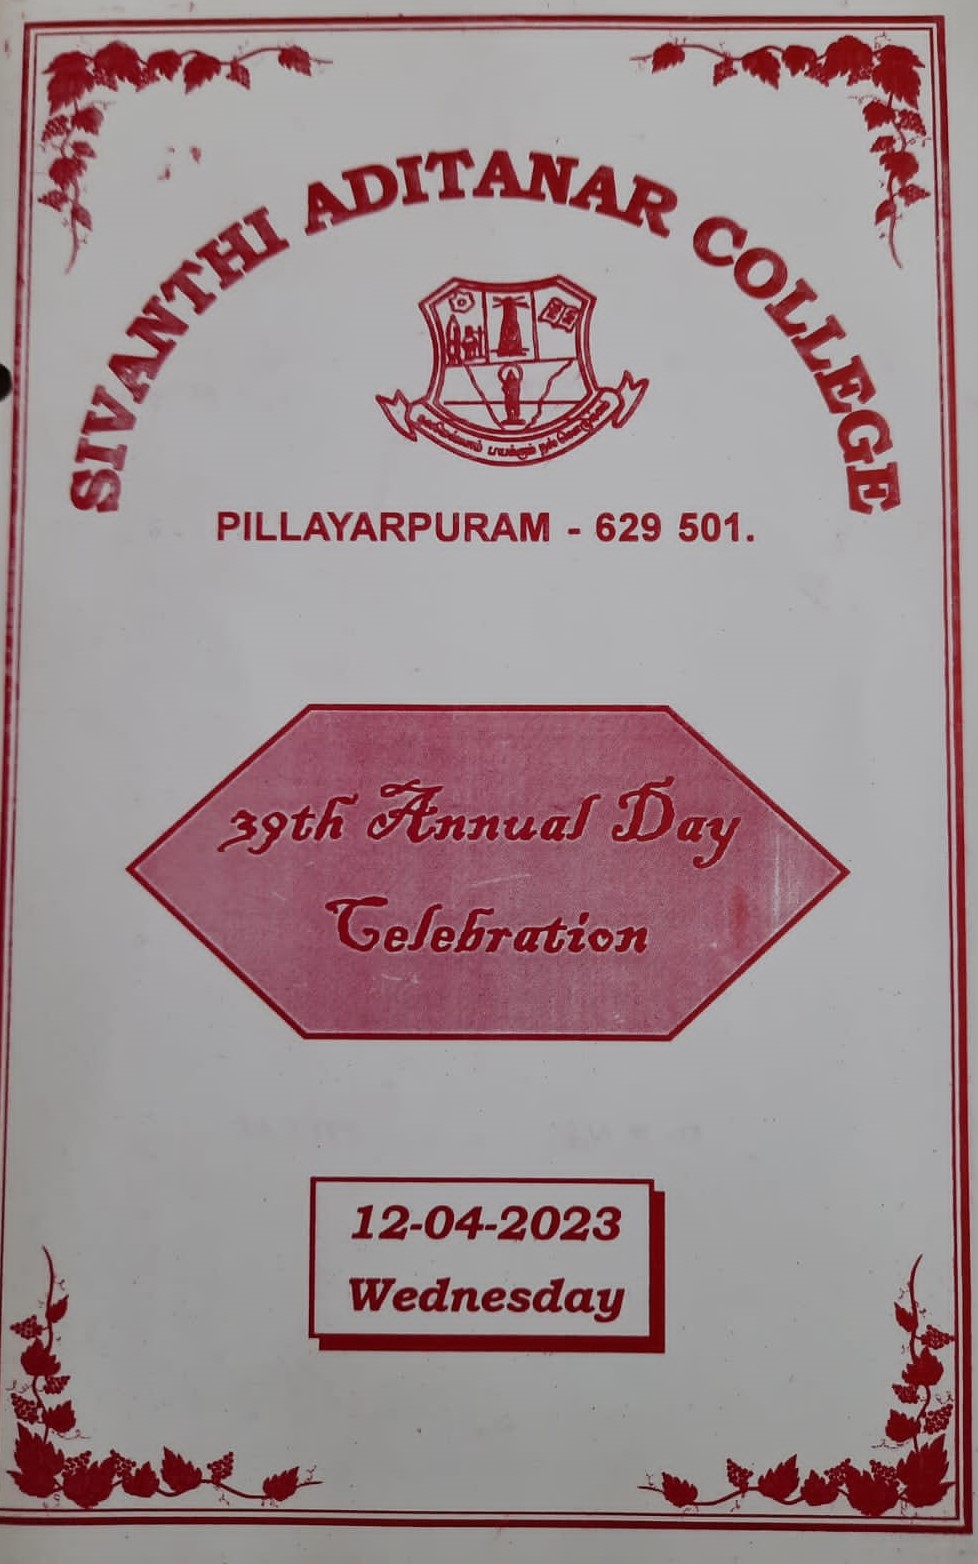 39th Annual Day on 12th April 2023